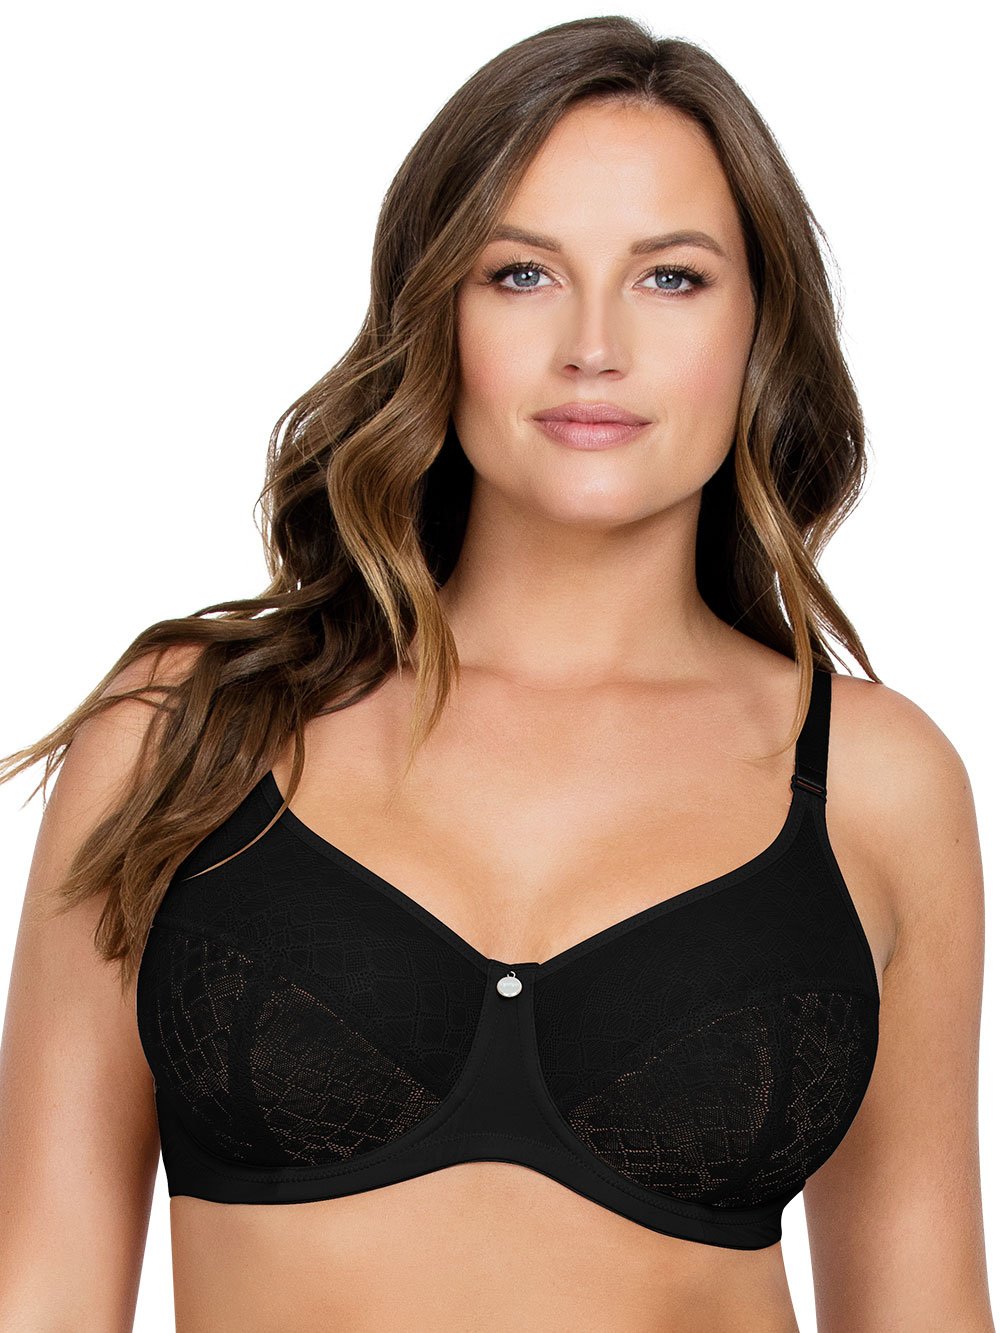 Plus Size Bras, Sexy Bras for Plus Size, Bigger & Full Figure Bras Tagged  Bras - HauteFlair